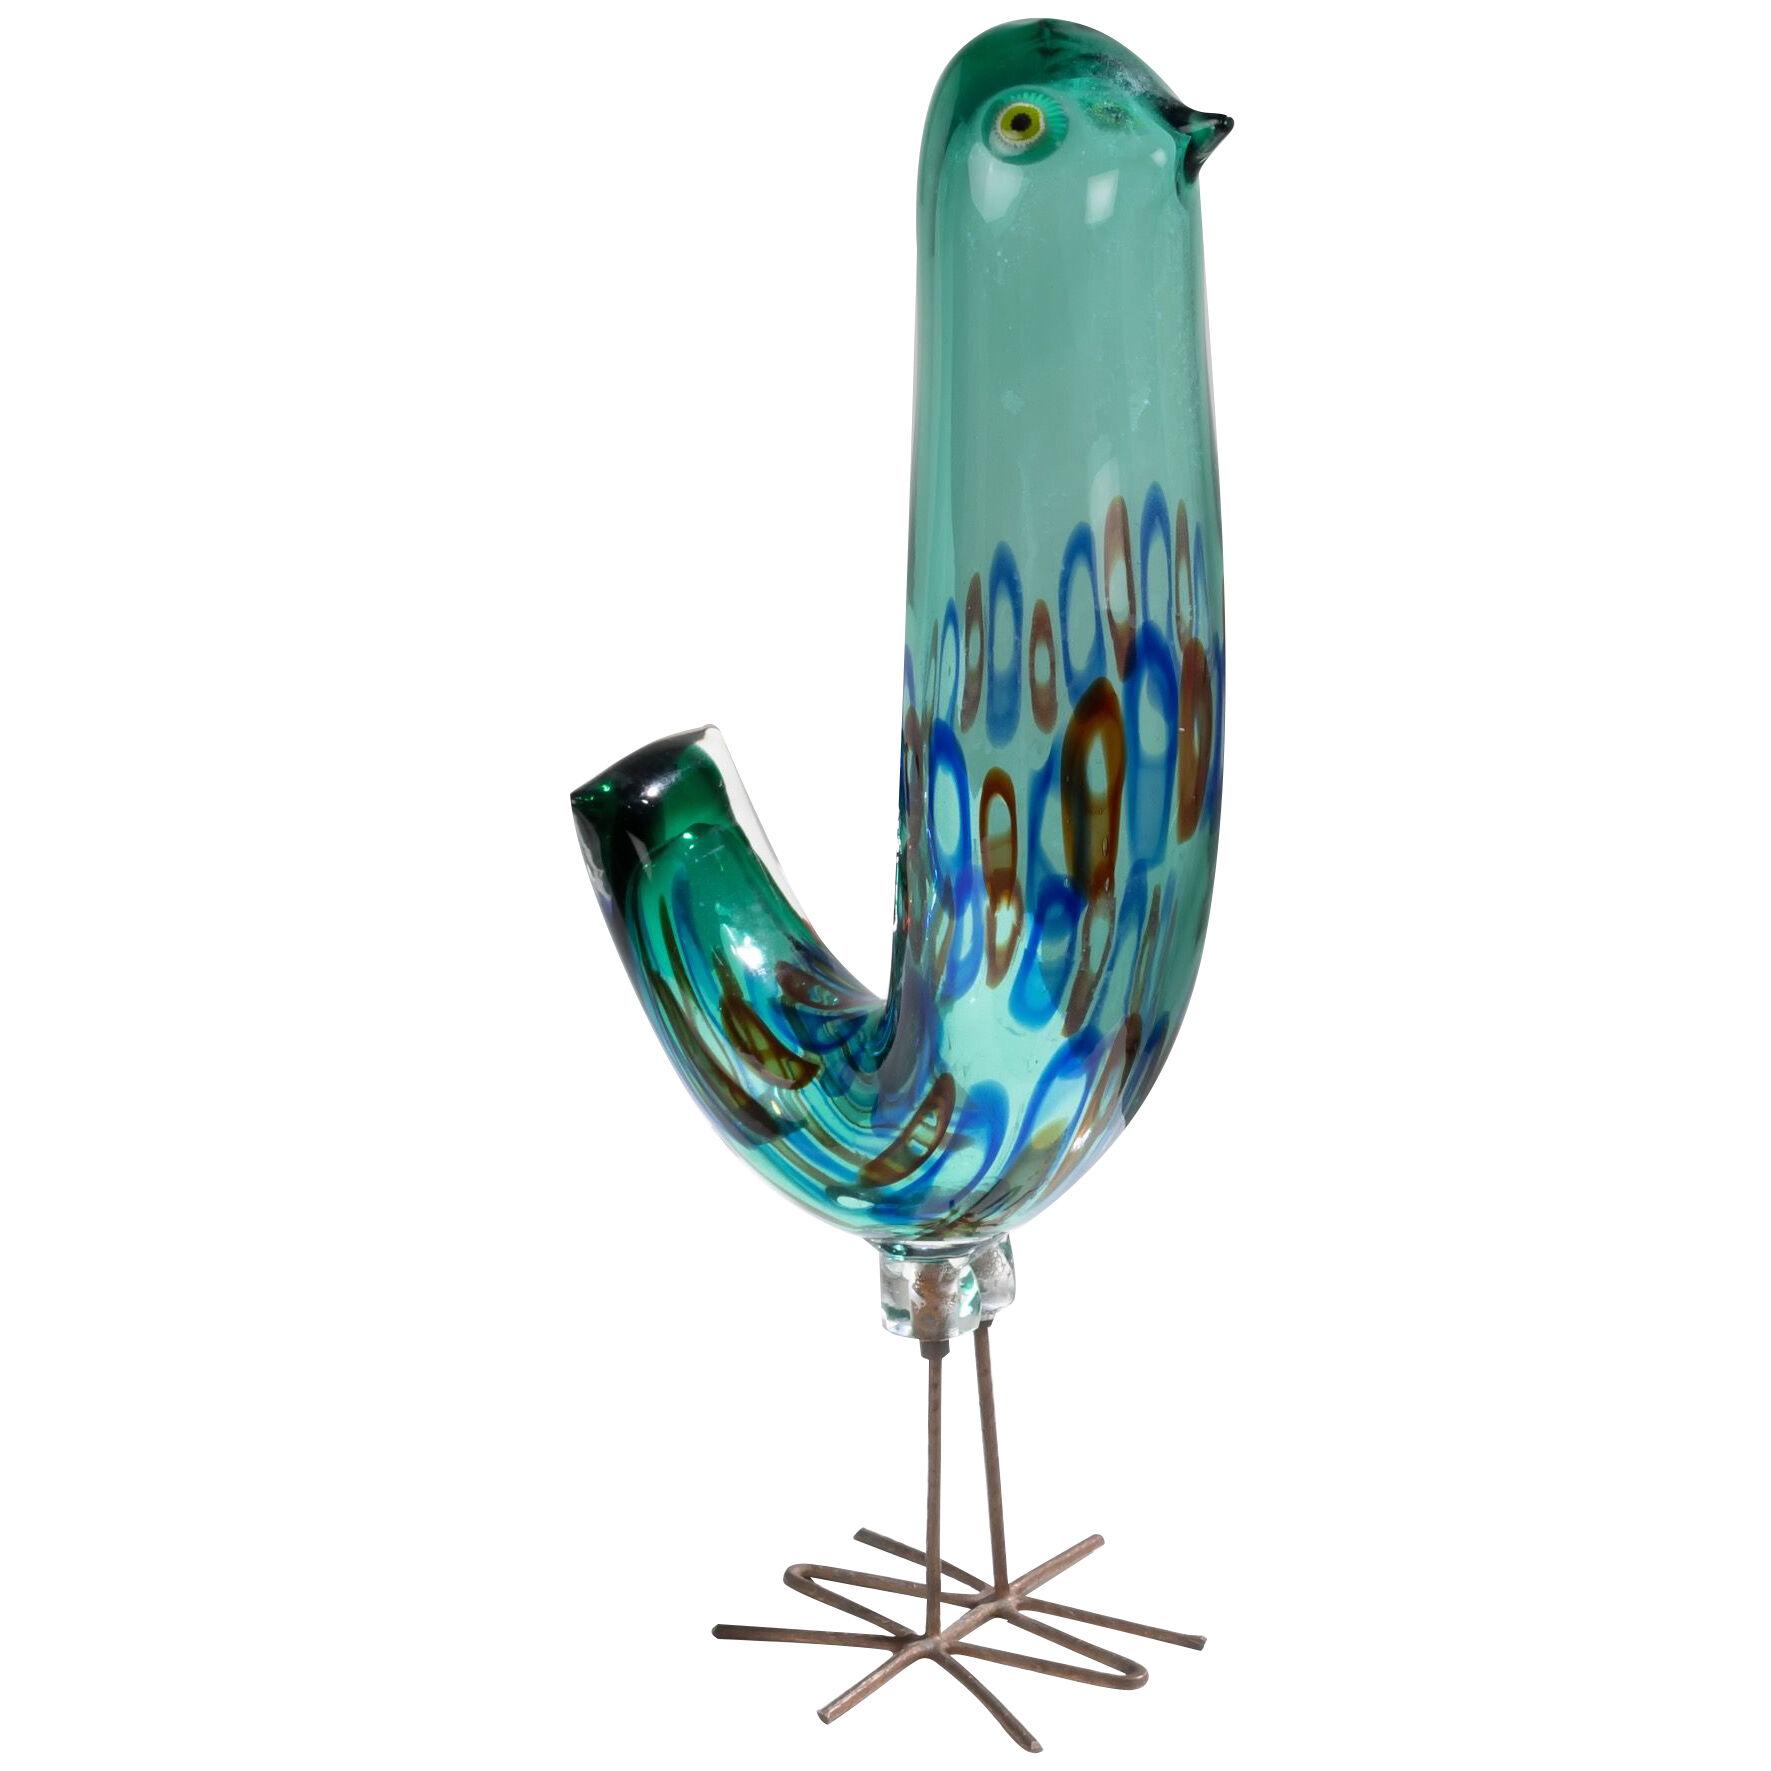 Sculpture of a bird in blown glass with murrine arrangement by Alessandro Pianon